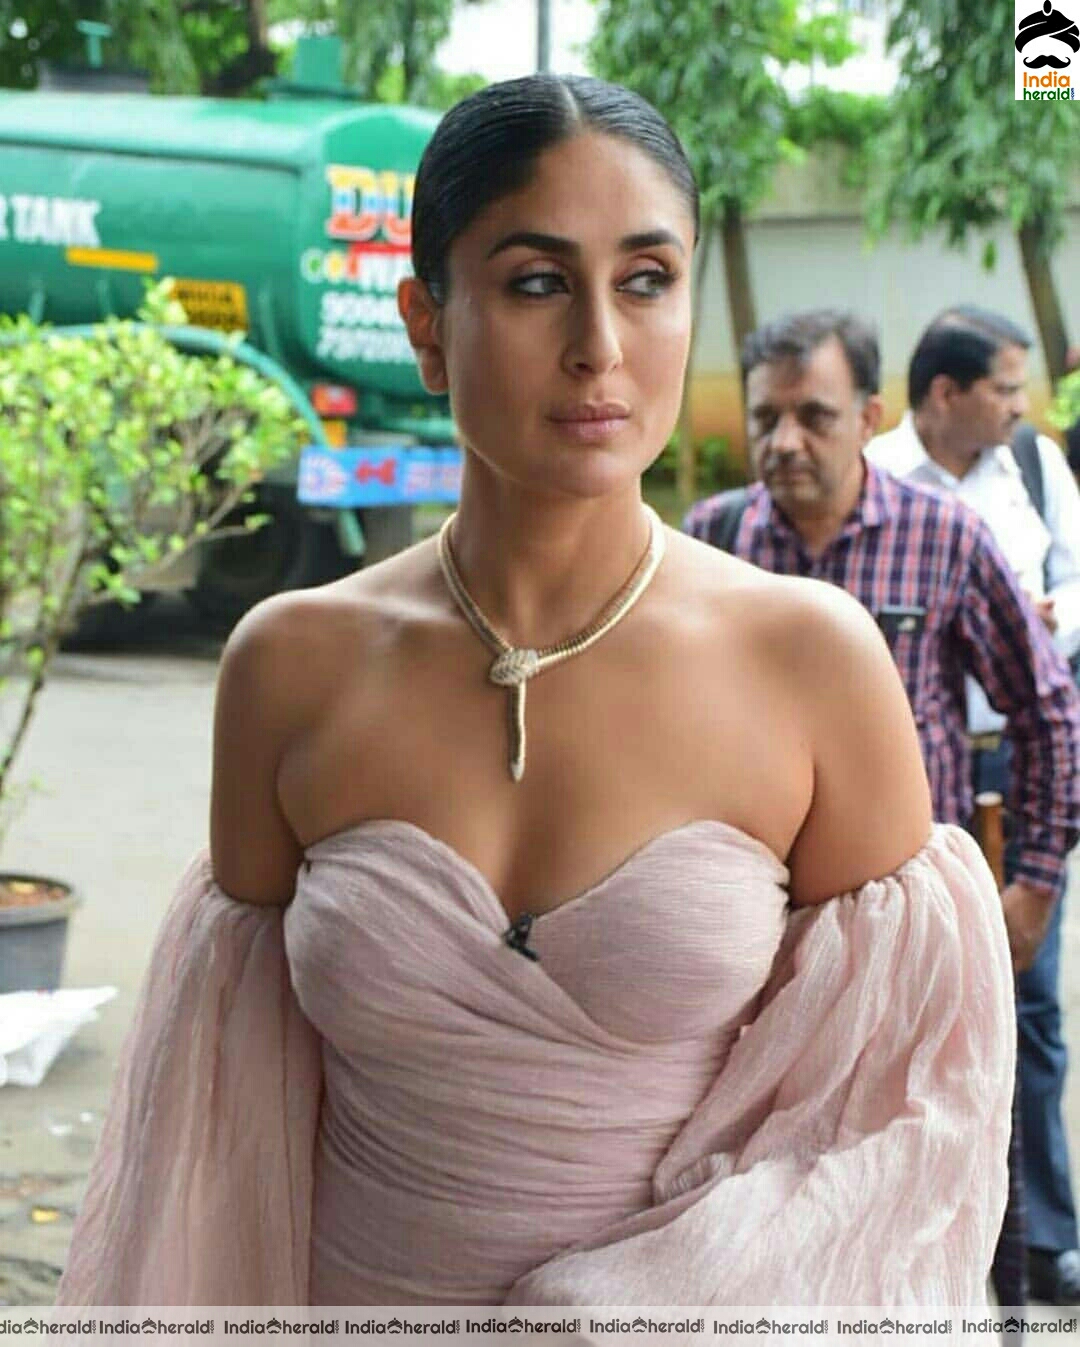 Kareena Kapoor Looking Like A Hot Chick In This Sexy Maxi